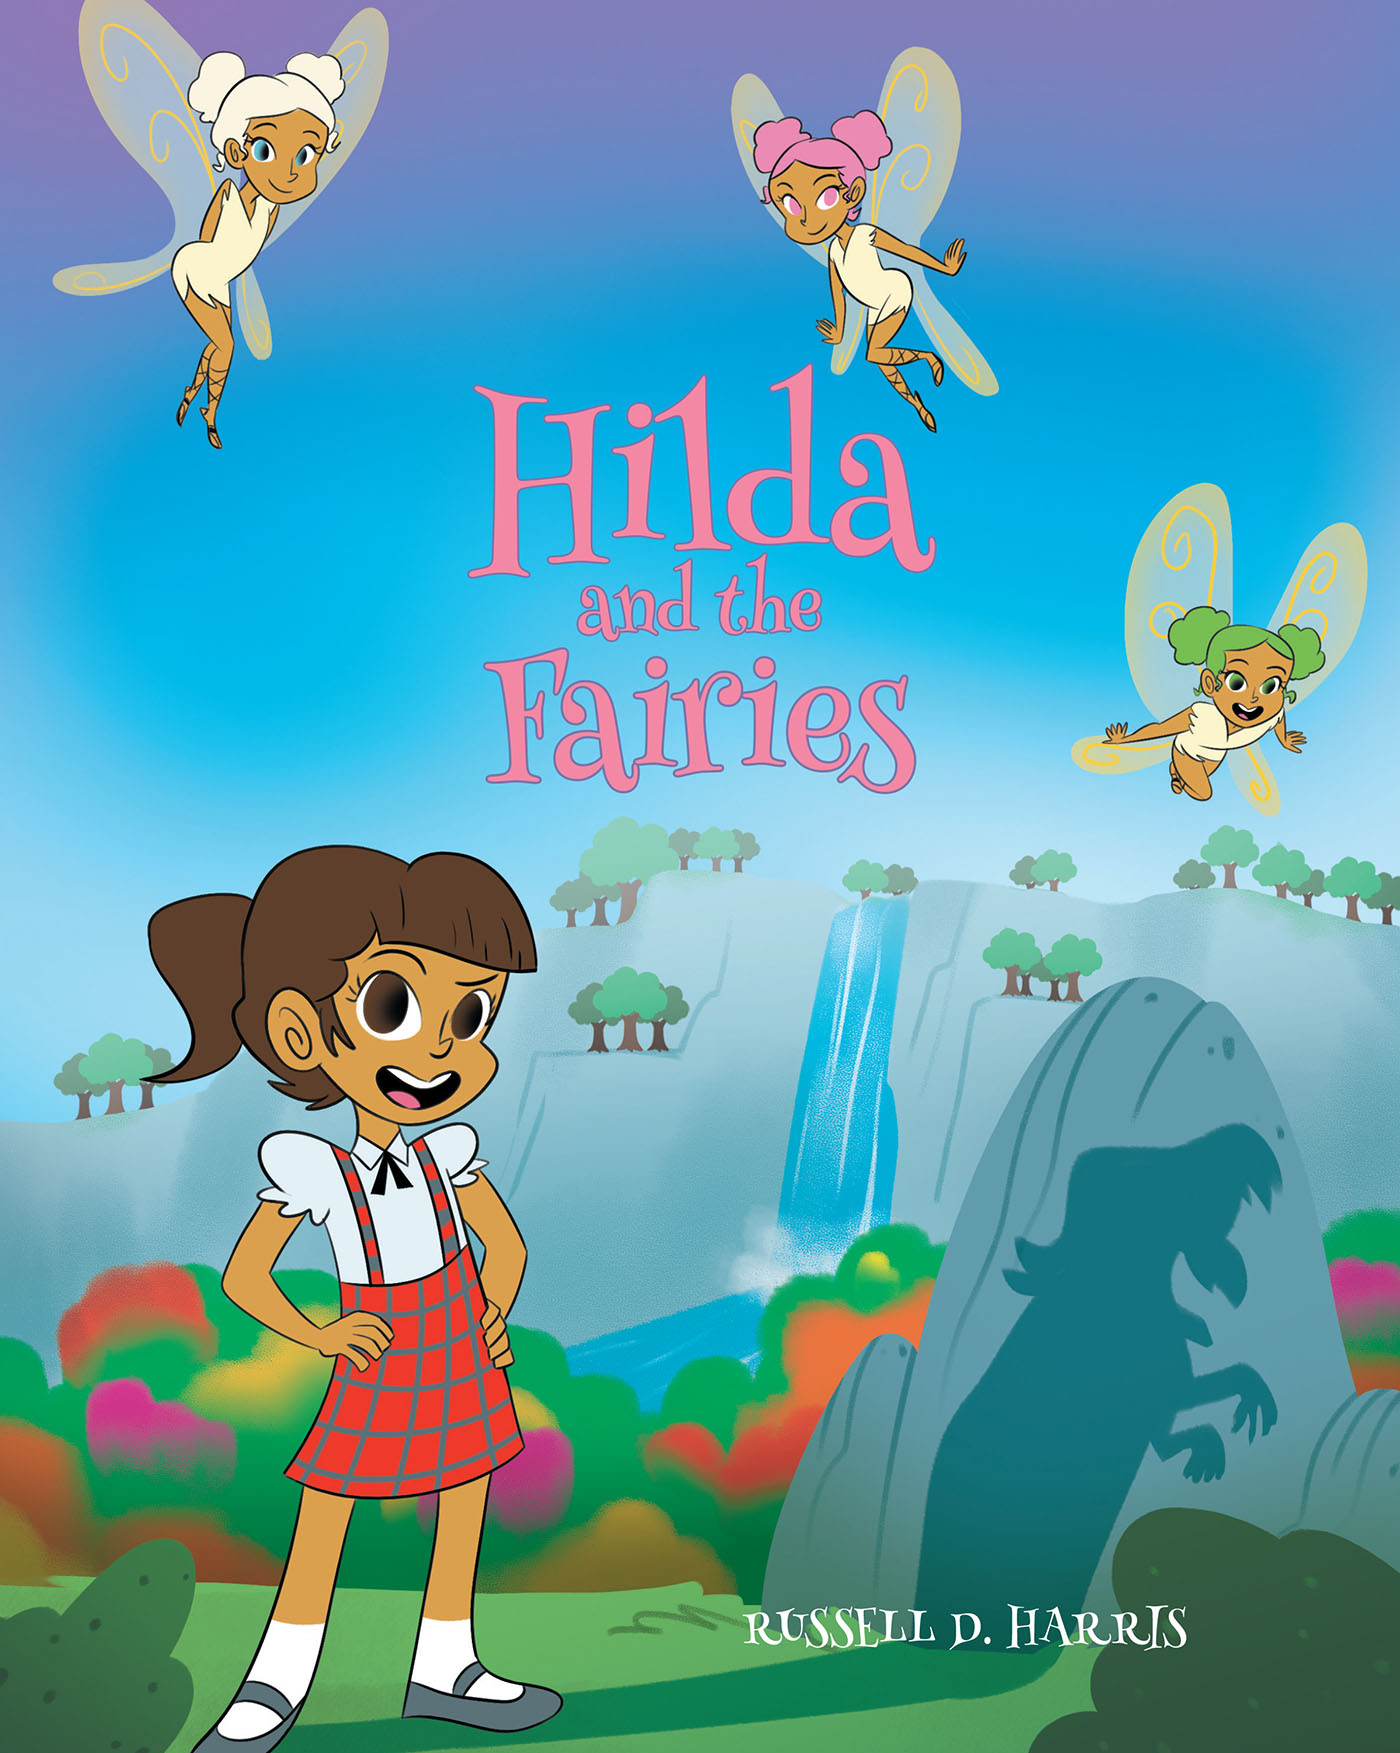 Author Russell D. Harris’s New Book, "Hilda and the Fairies," is a Charming and Suspenseful Children’s Story, Sure to Become a Favorite for Young Readers